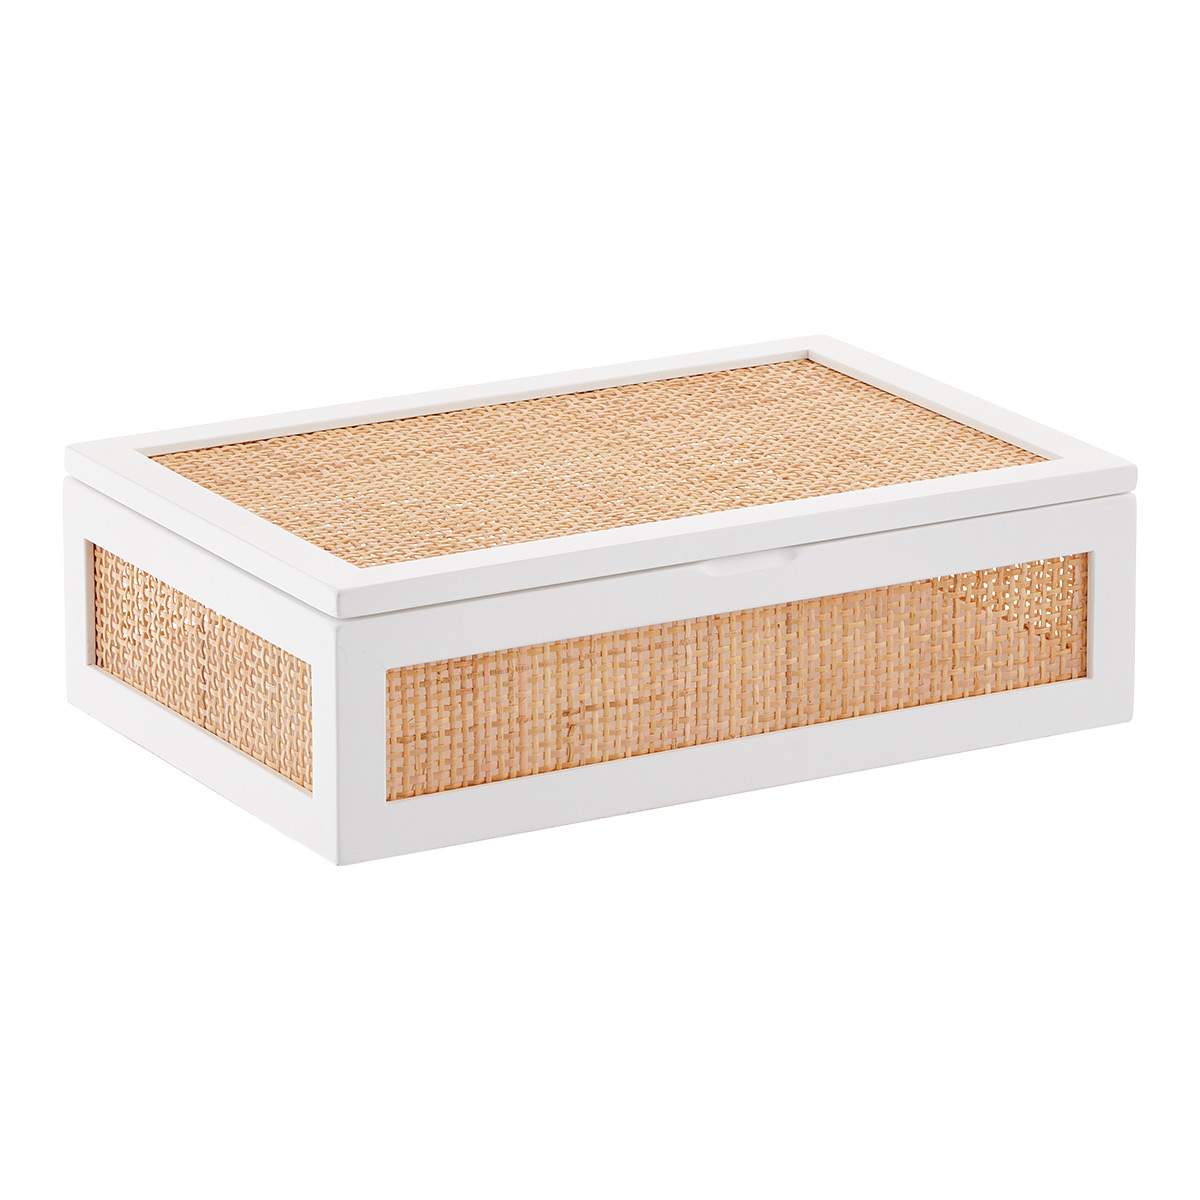 The Container Store Large Artisan Rattan Cane Hinge Lid Box White